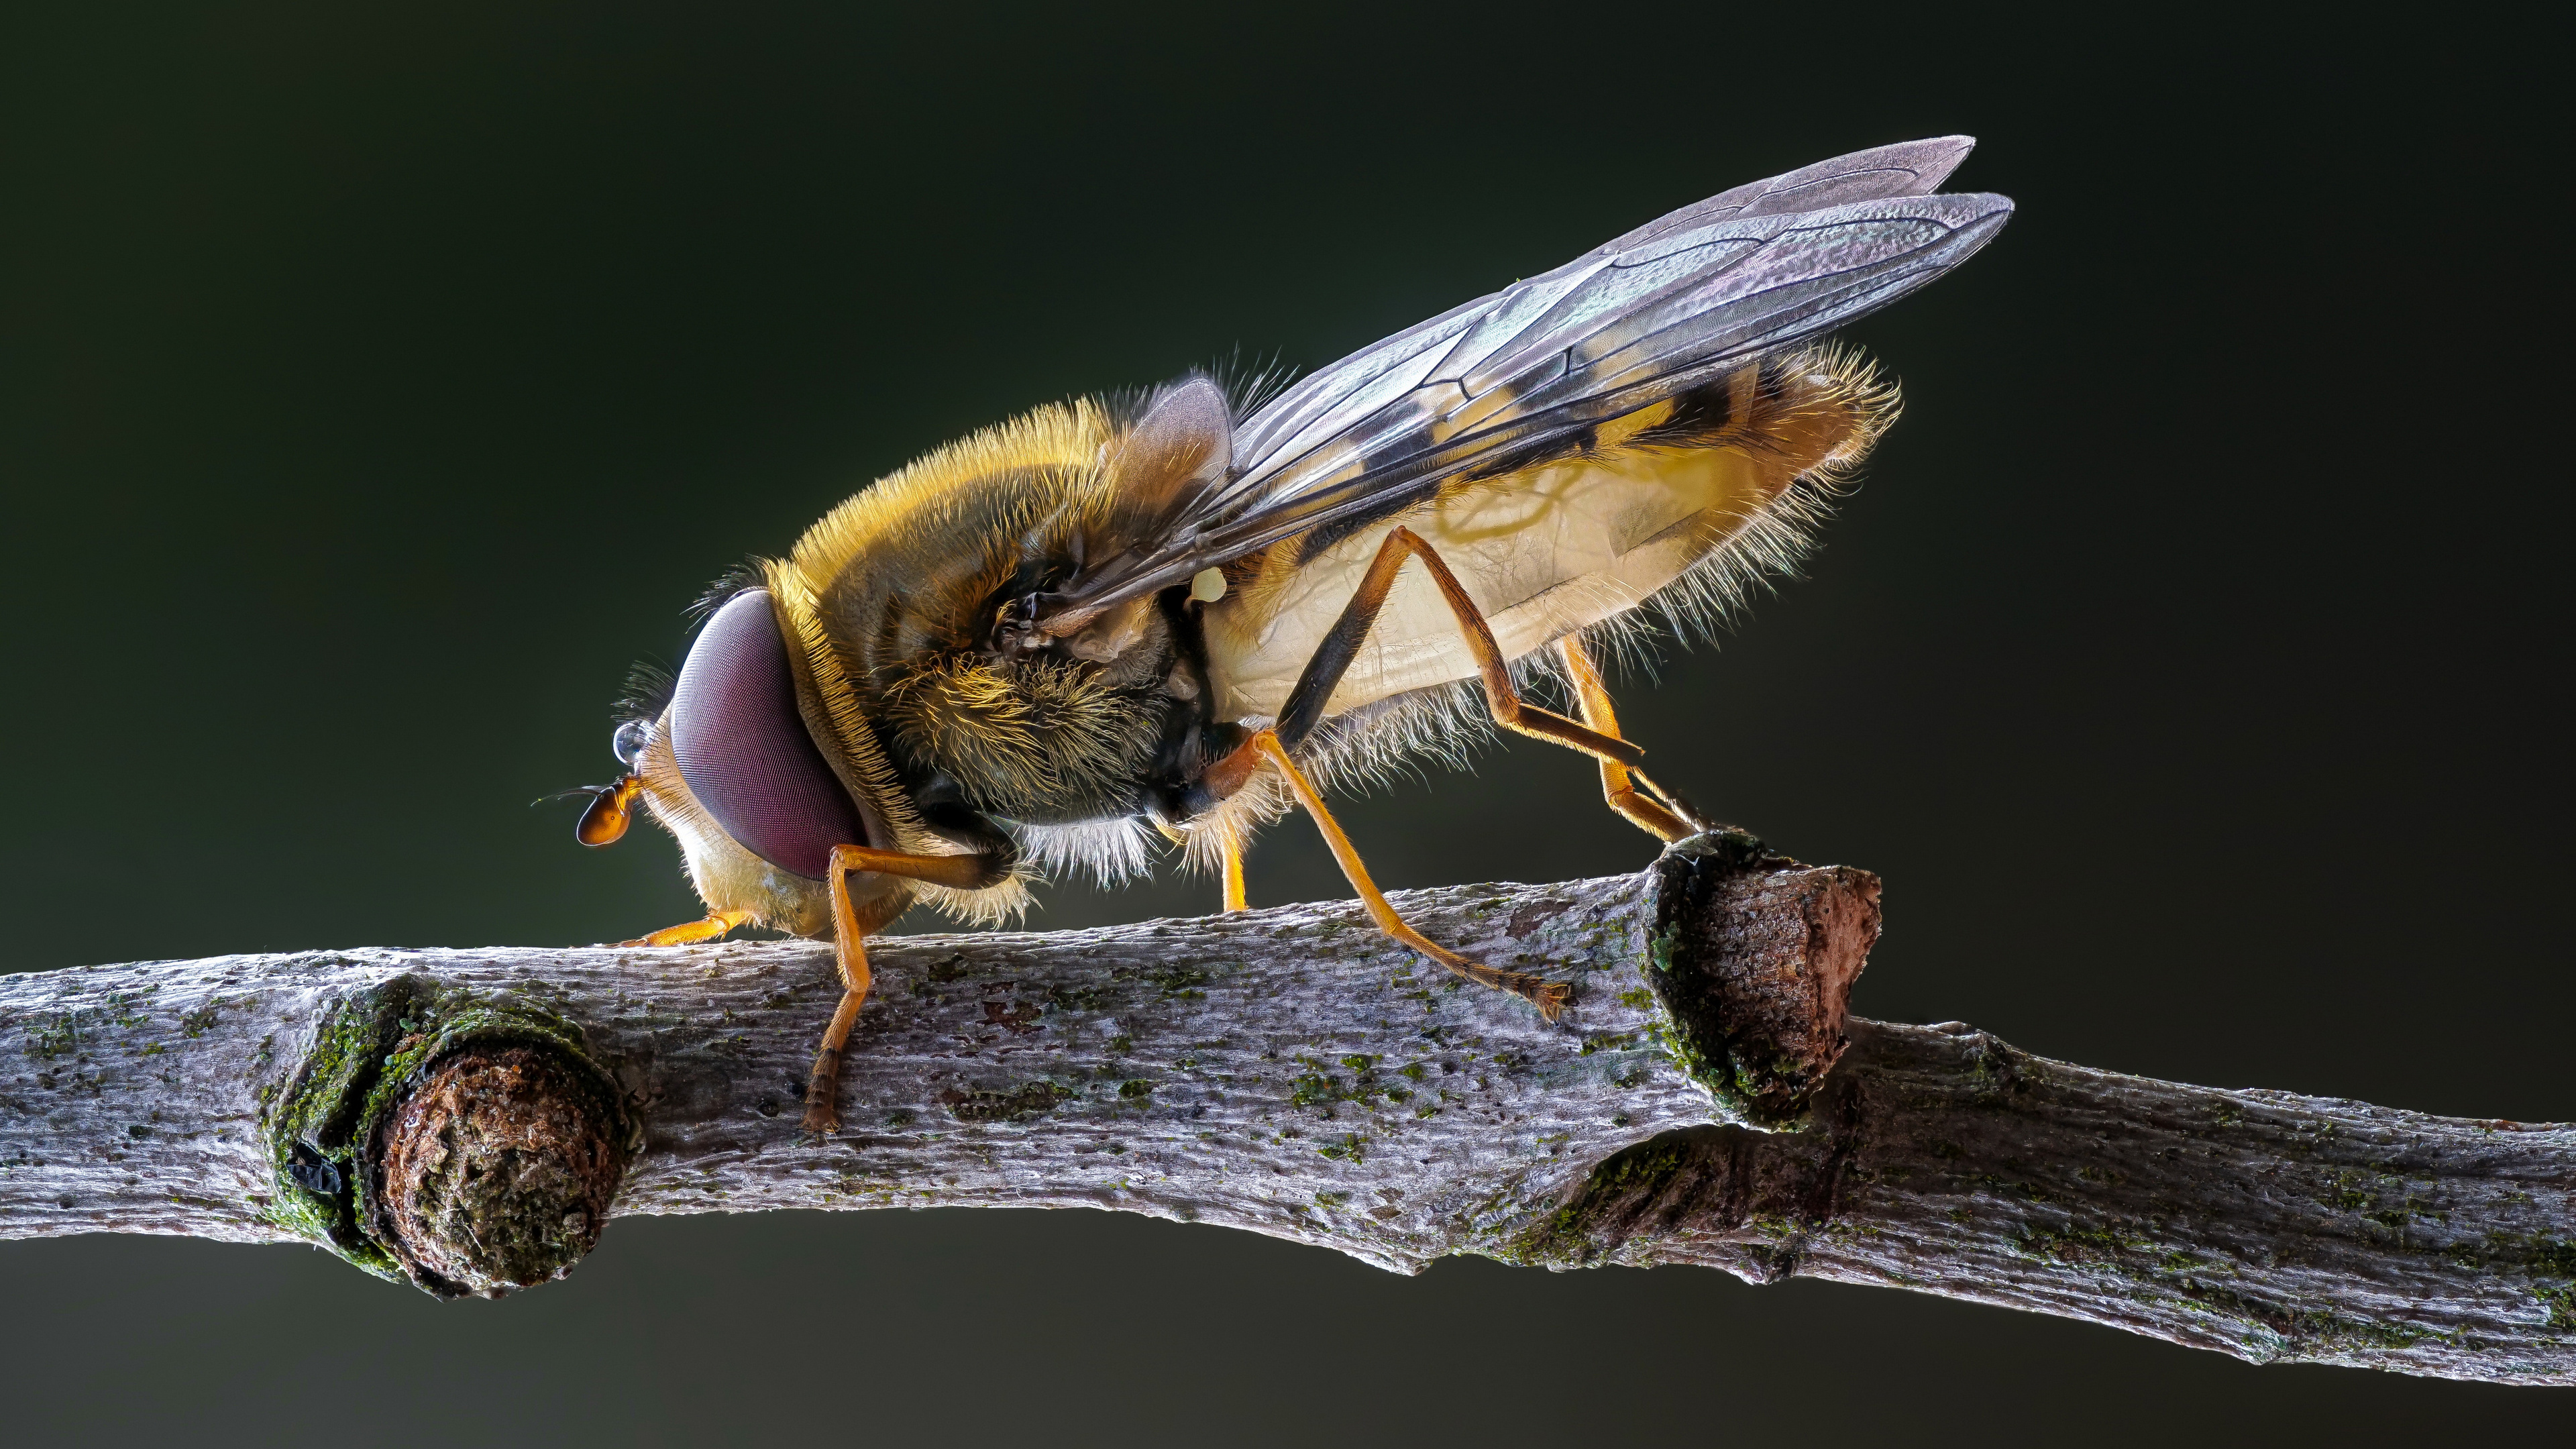 General 3840x2160 syrphid fly macro insect depth of field animals nature twigs branch